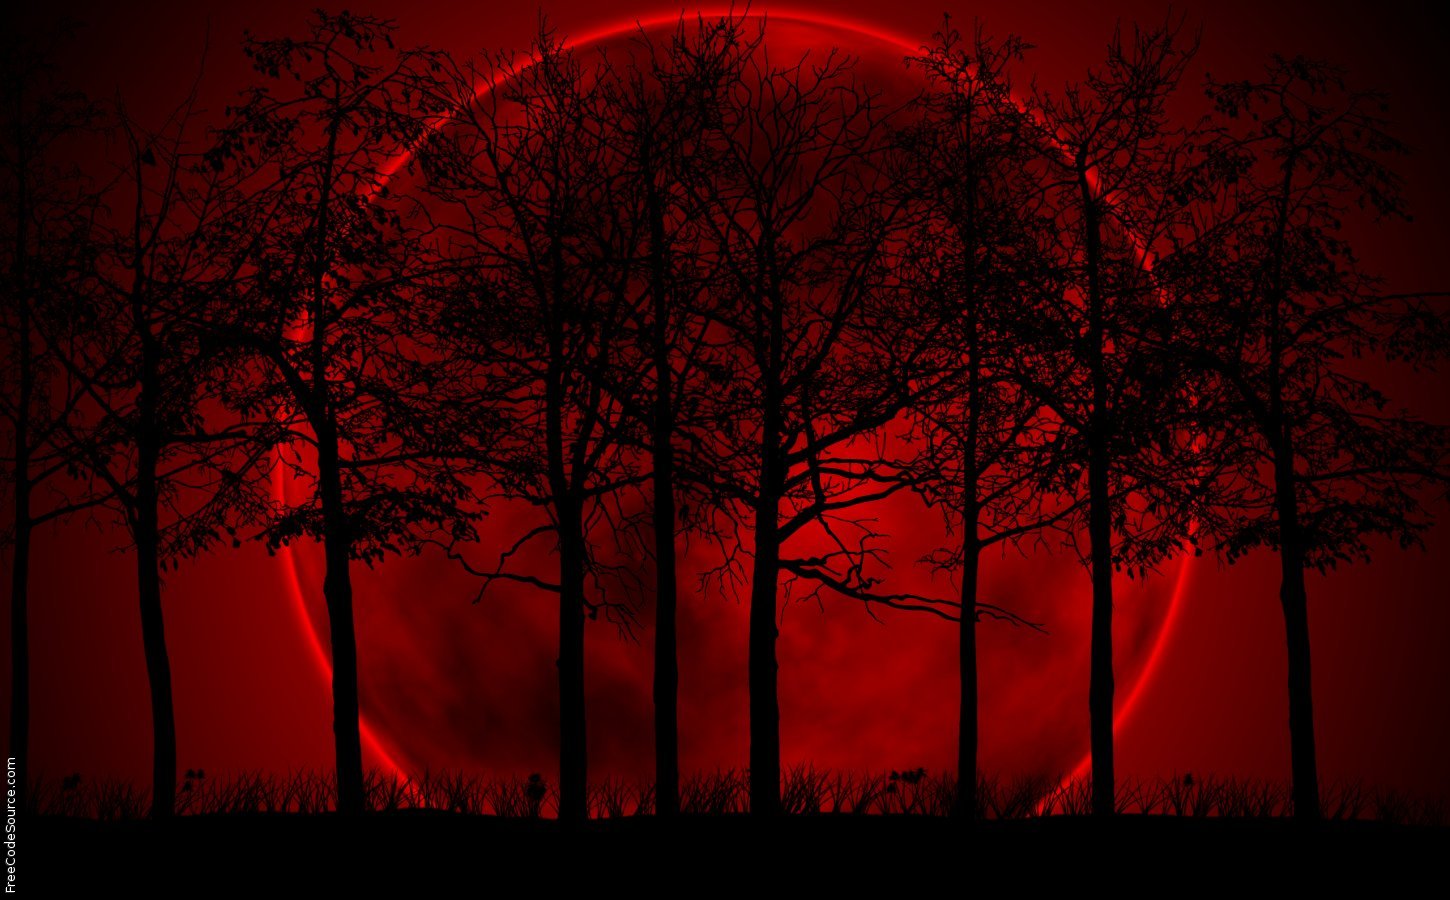 Out of the Shadows: Night of the Blood Moon